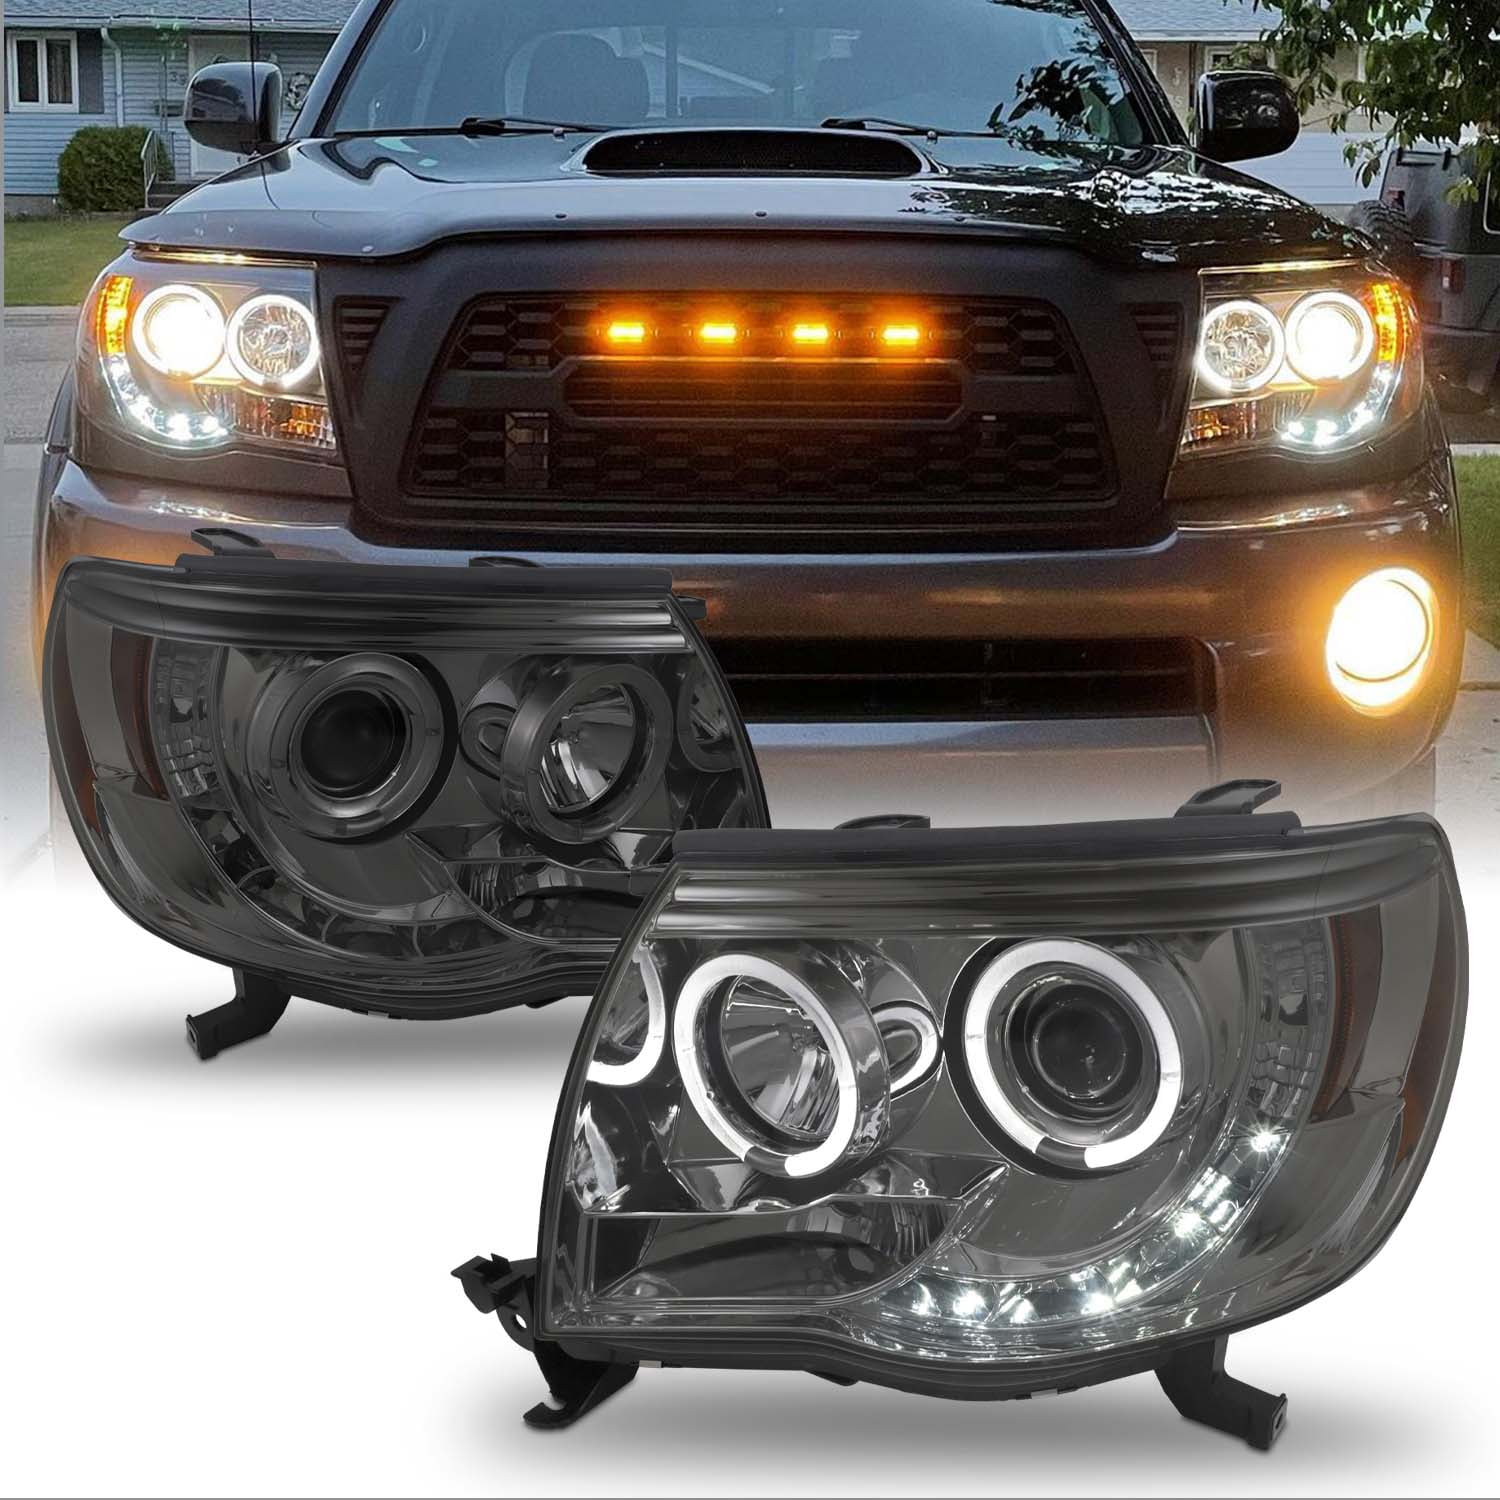 LED Halo Ring Chrome Projector Headlight Headlamp Assembly For 2005-2011 Toyota Tacoma Pickup Truck Driver & Passenger Side 